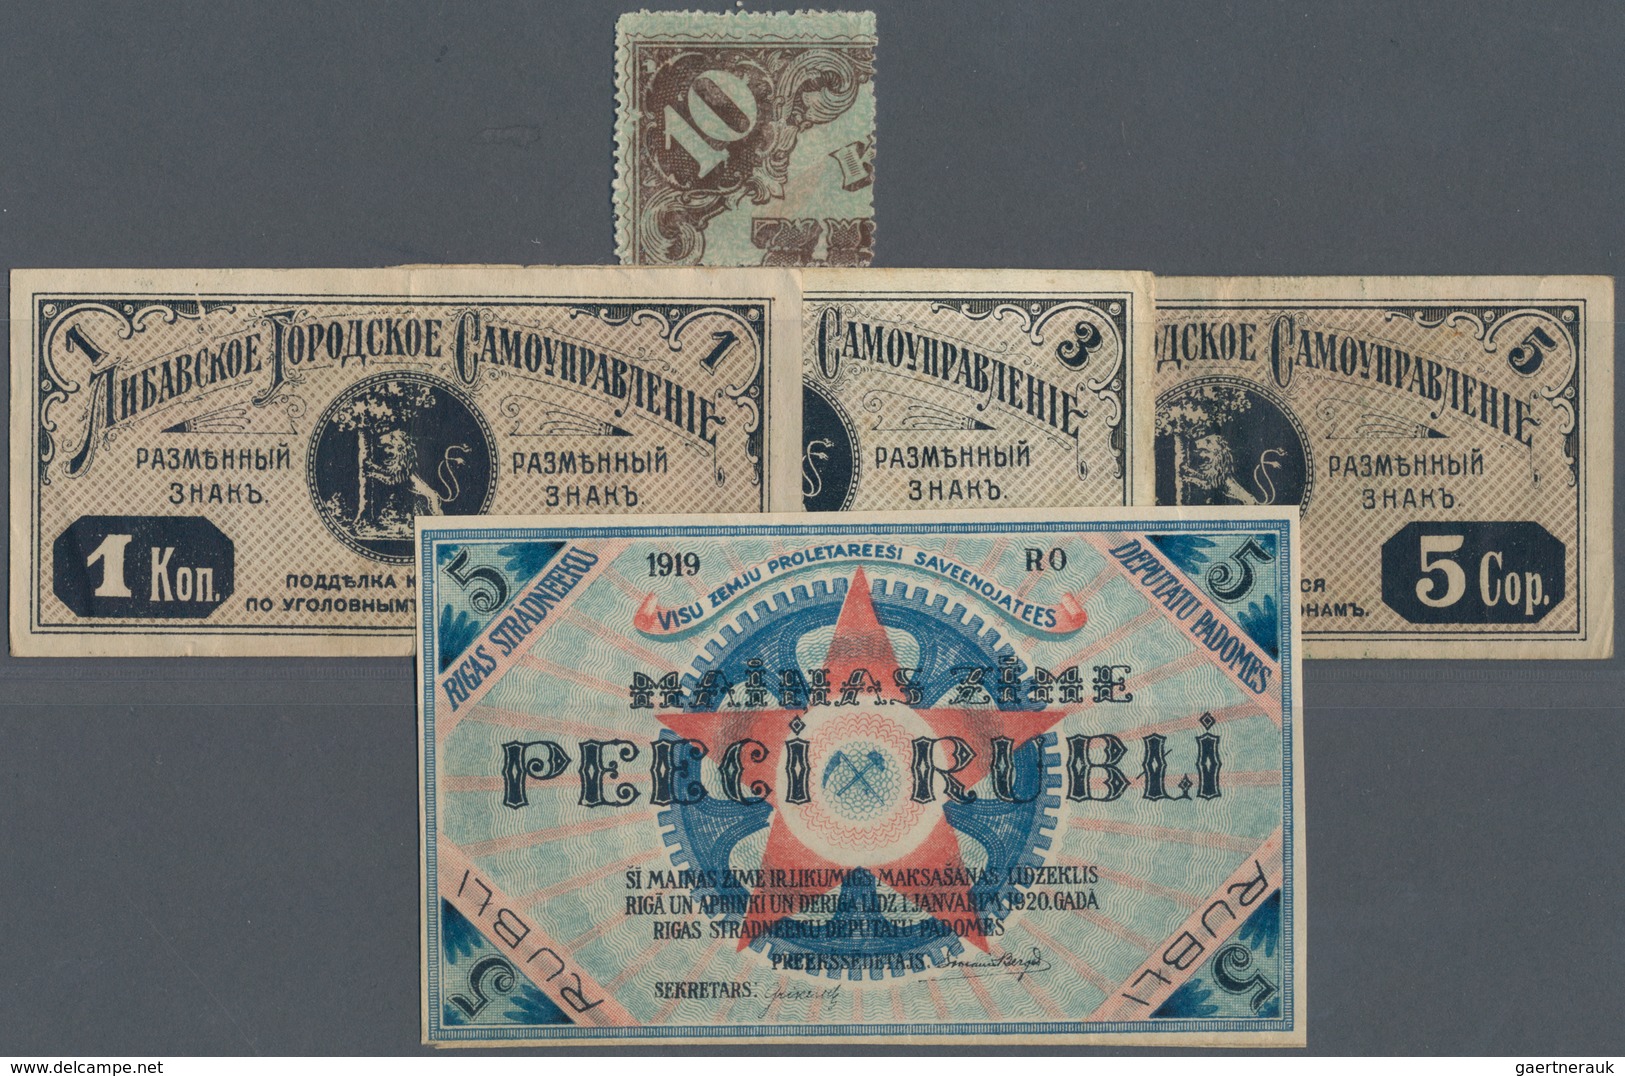 Latvia / Lettland: Libau City Government Set With 3 Banknotes 1, 3 And 5 Kopeks 1915 In F, City Of R - Lettland